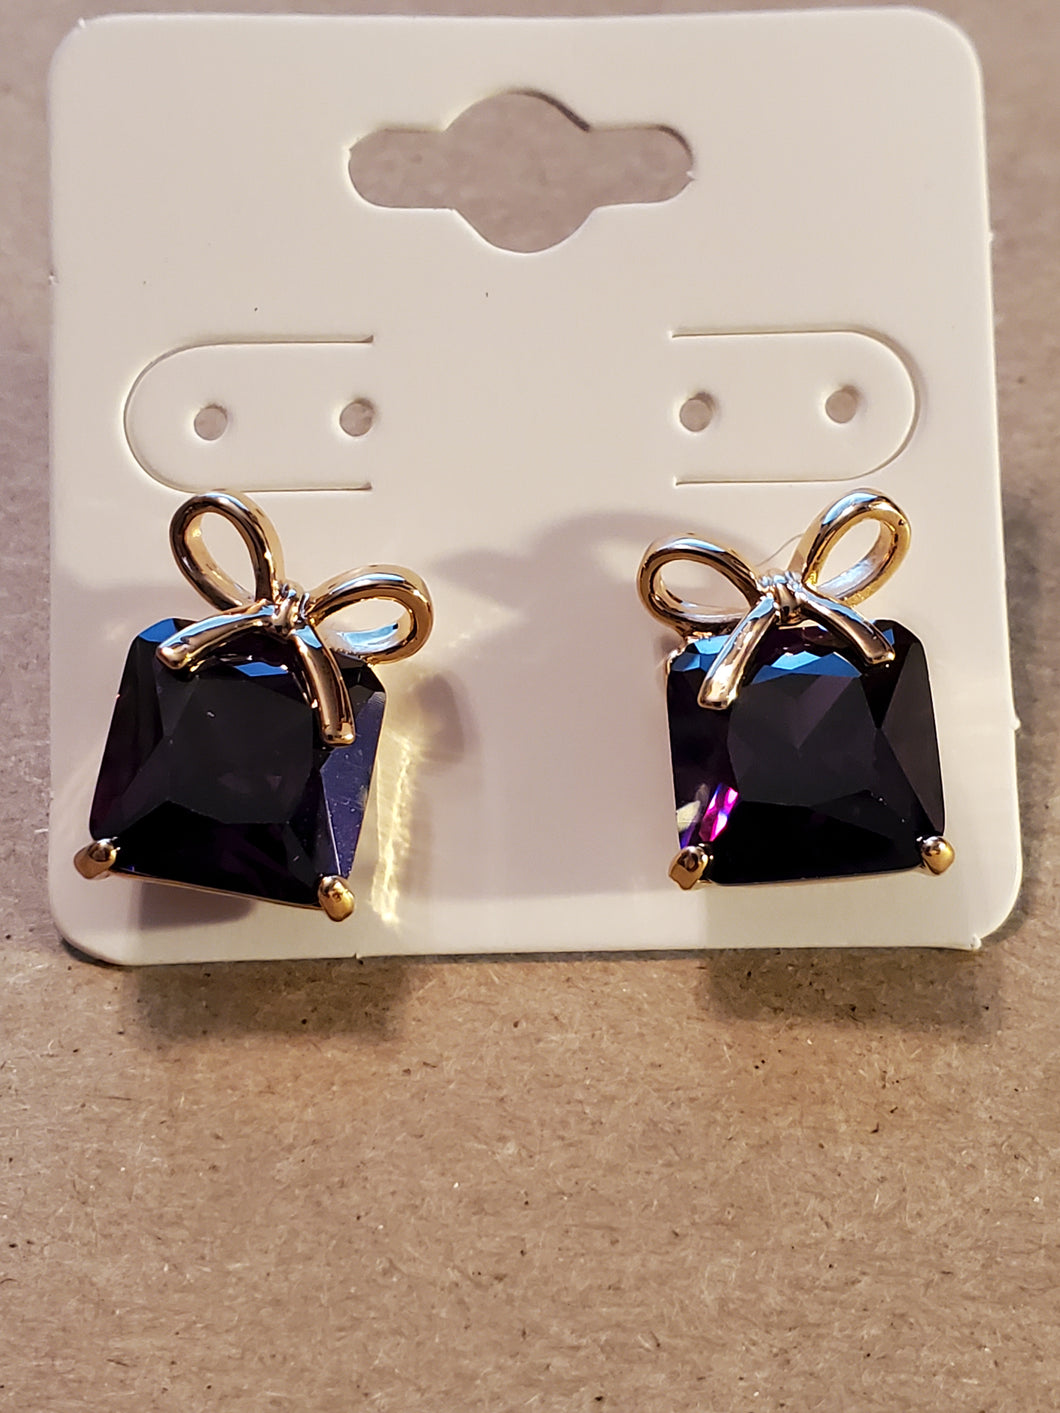 Gift Box Earrings - Unique Inspirations by Tracy and Anna